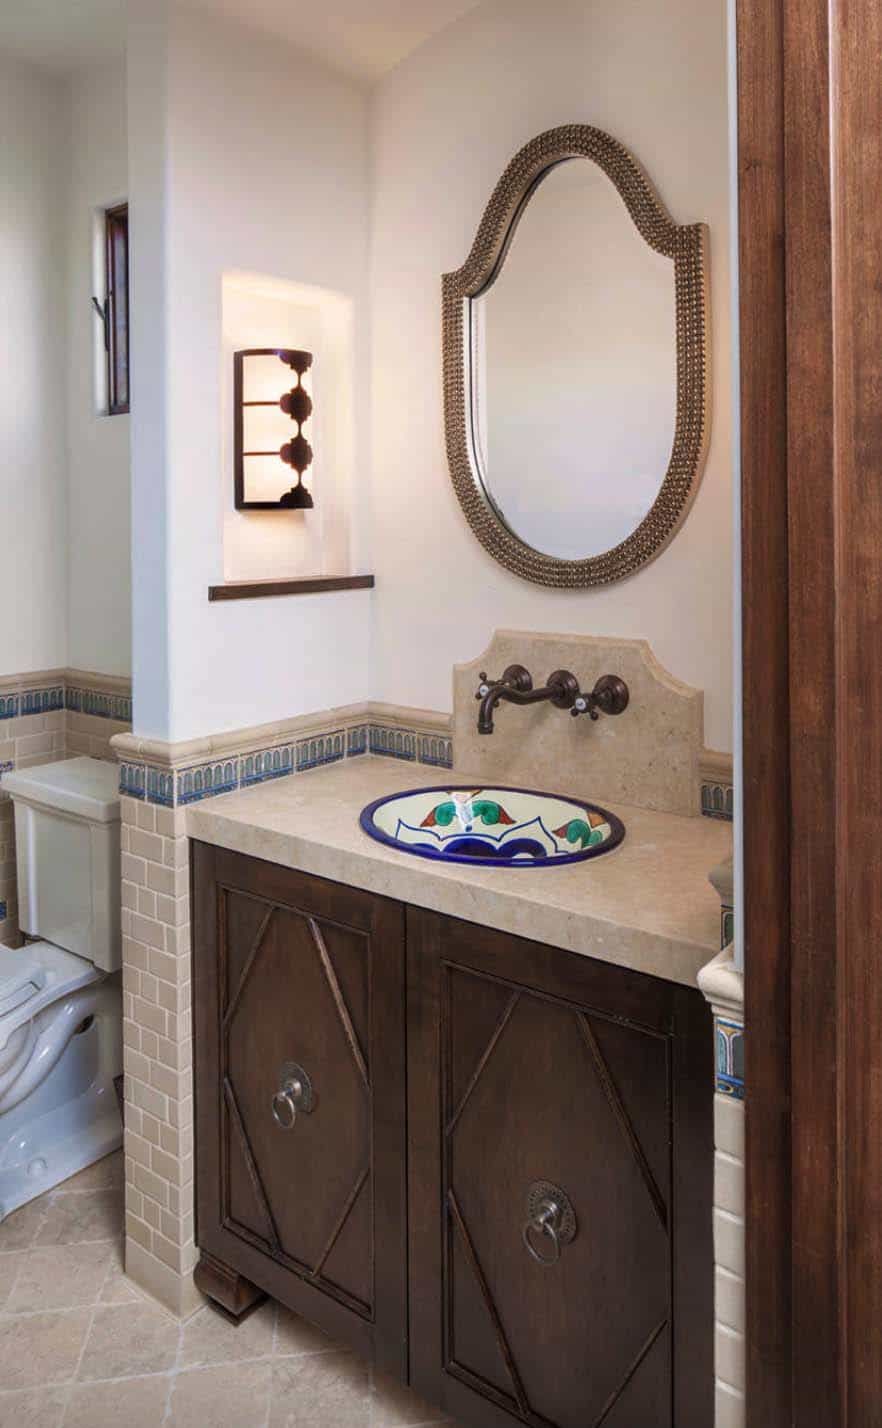 There are small bursts of color in every section of the house, including the bathrooms which have beautiful washbasins